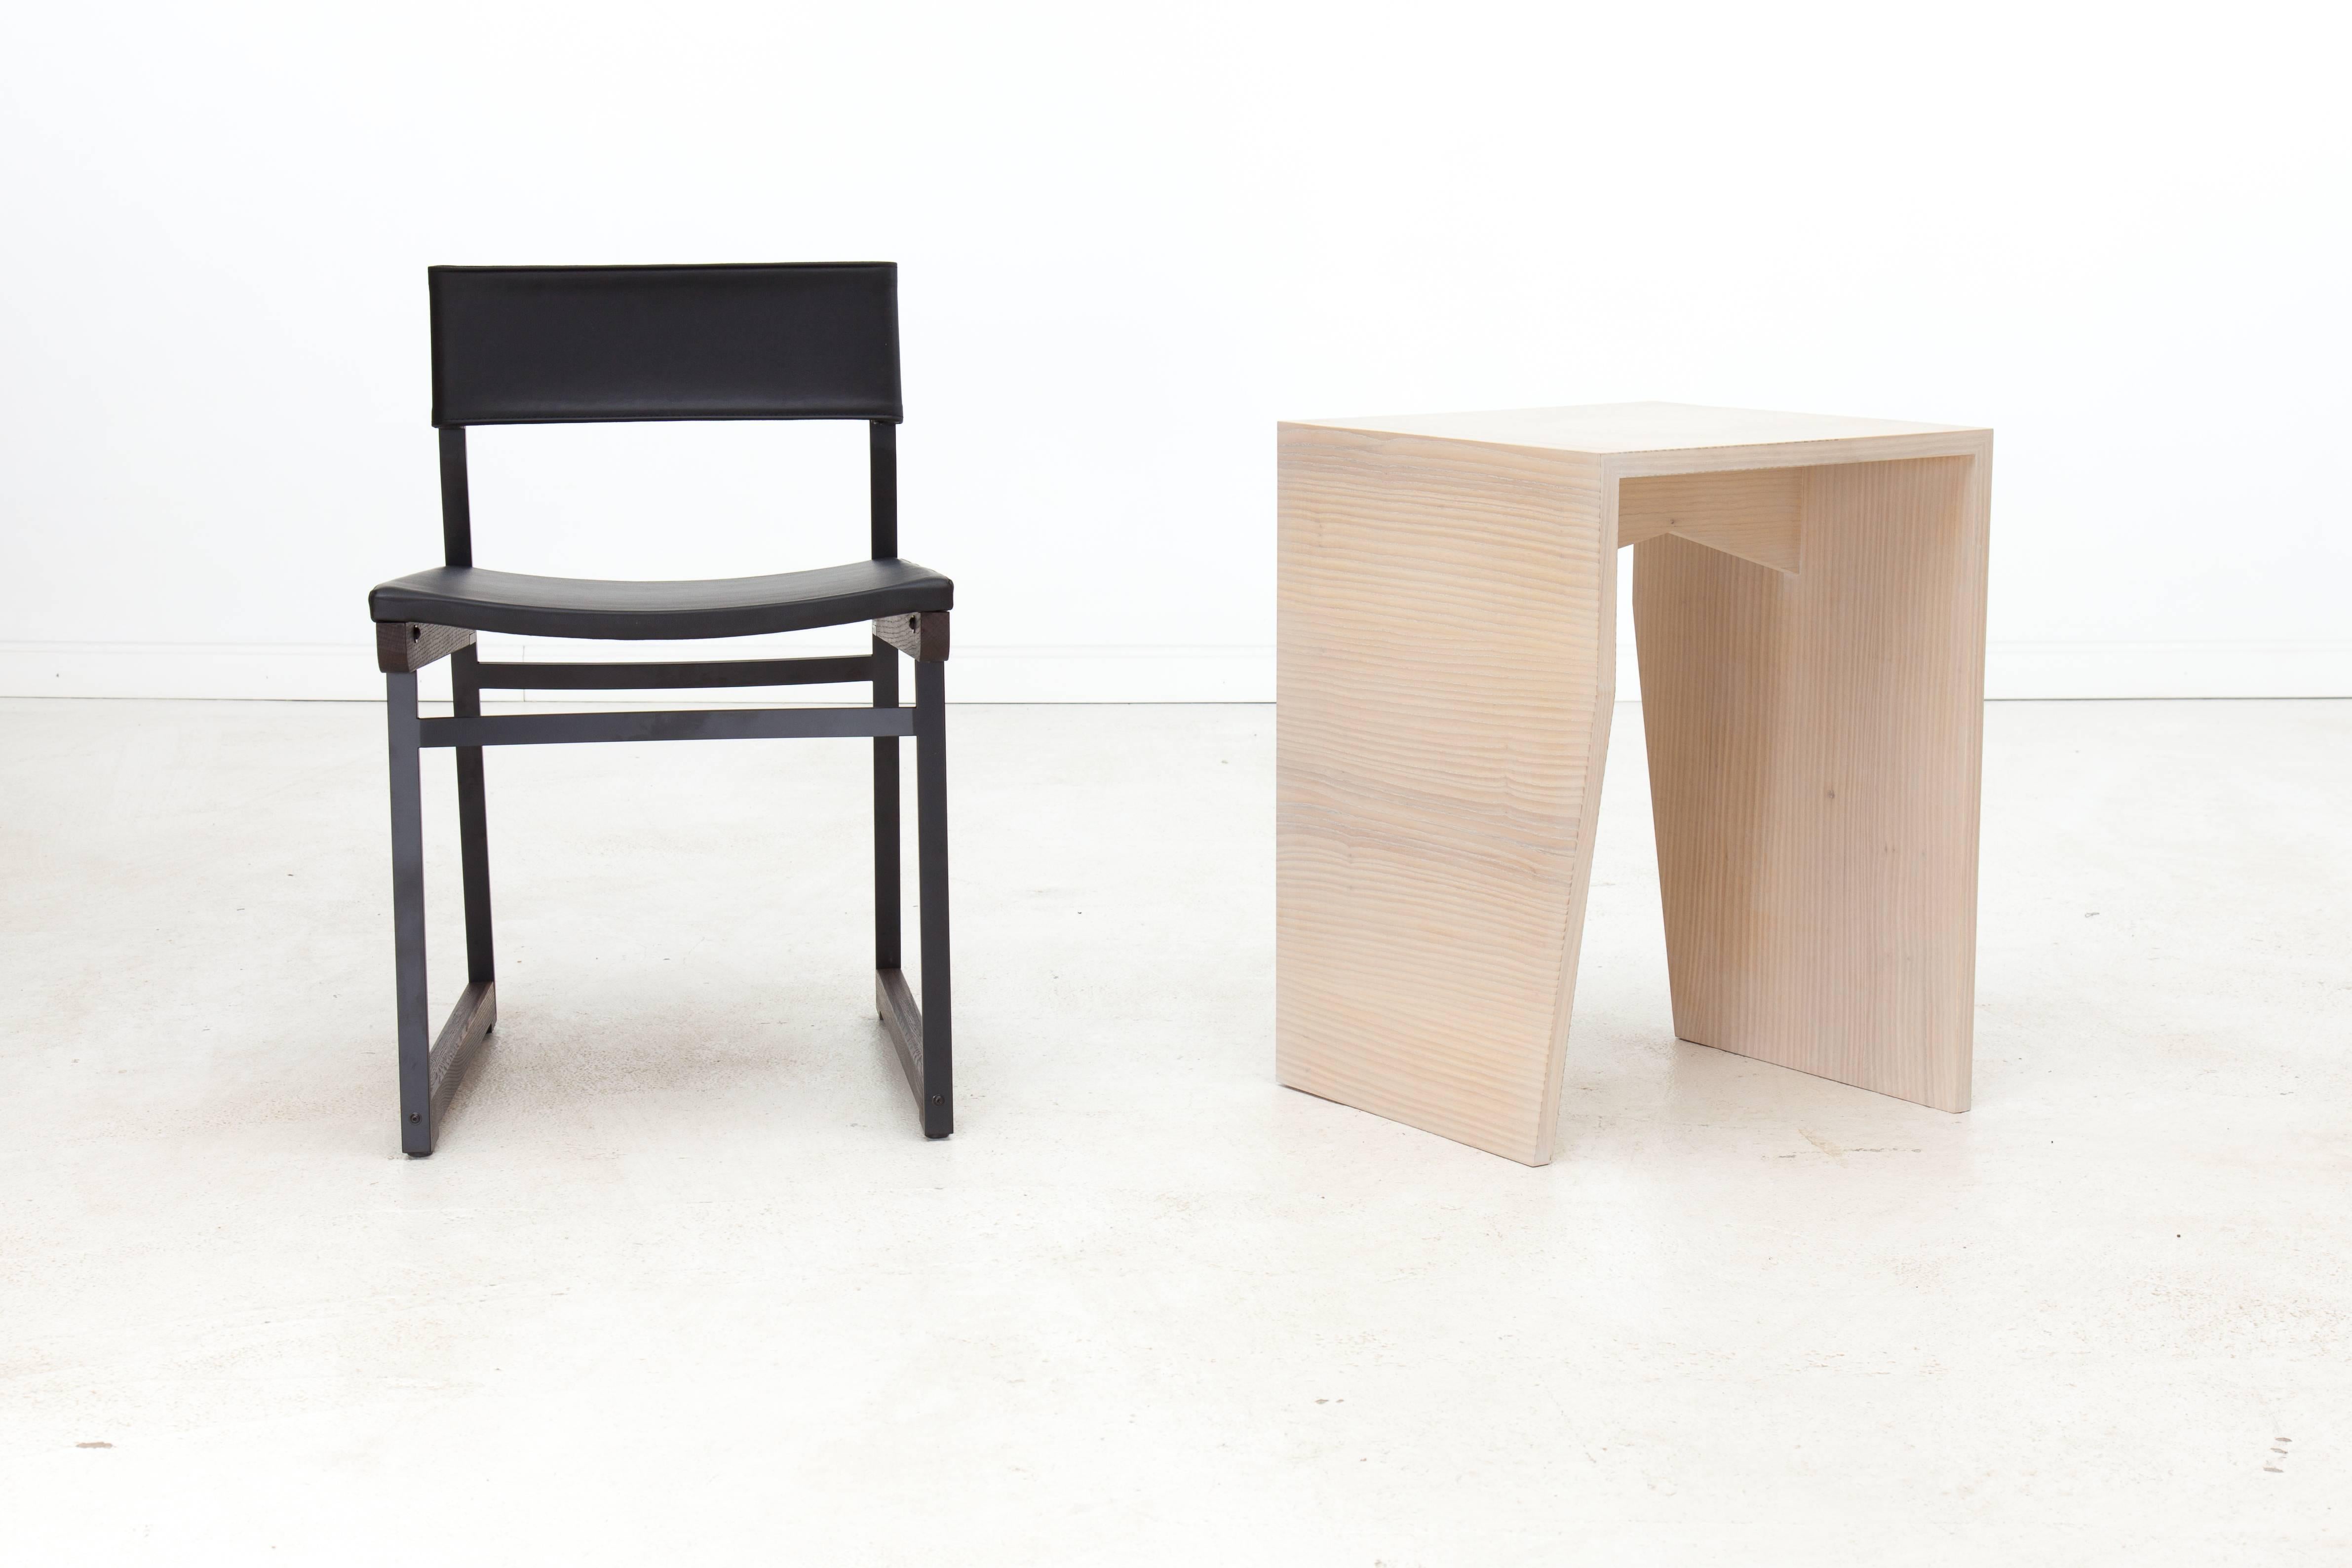 The angles and form of the Zooey side table are a nod to Brutalist architecture and Minimalist sculpture of the 1960s and 1970s. Shown in cerused ash and available in a variety of American hardwoods. The Zooey side table is made to order, so